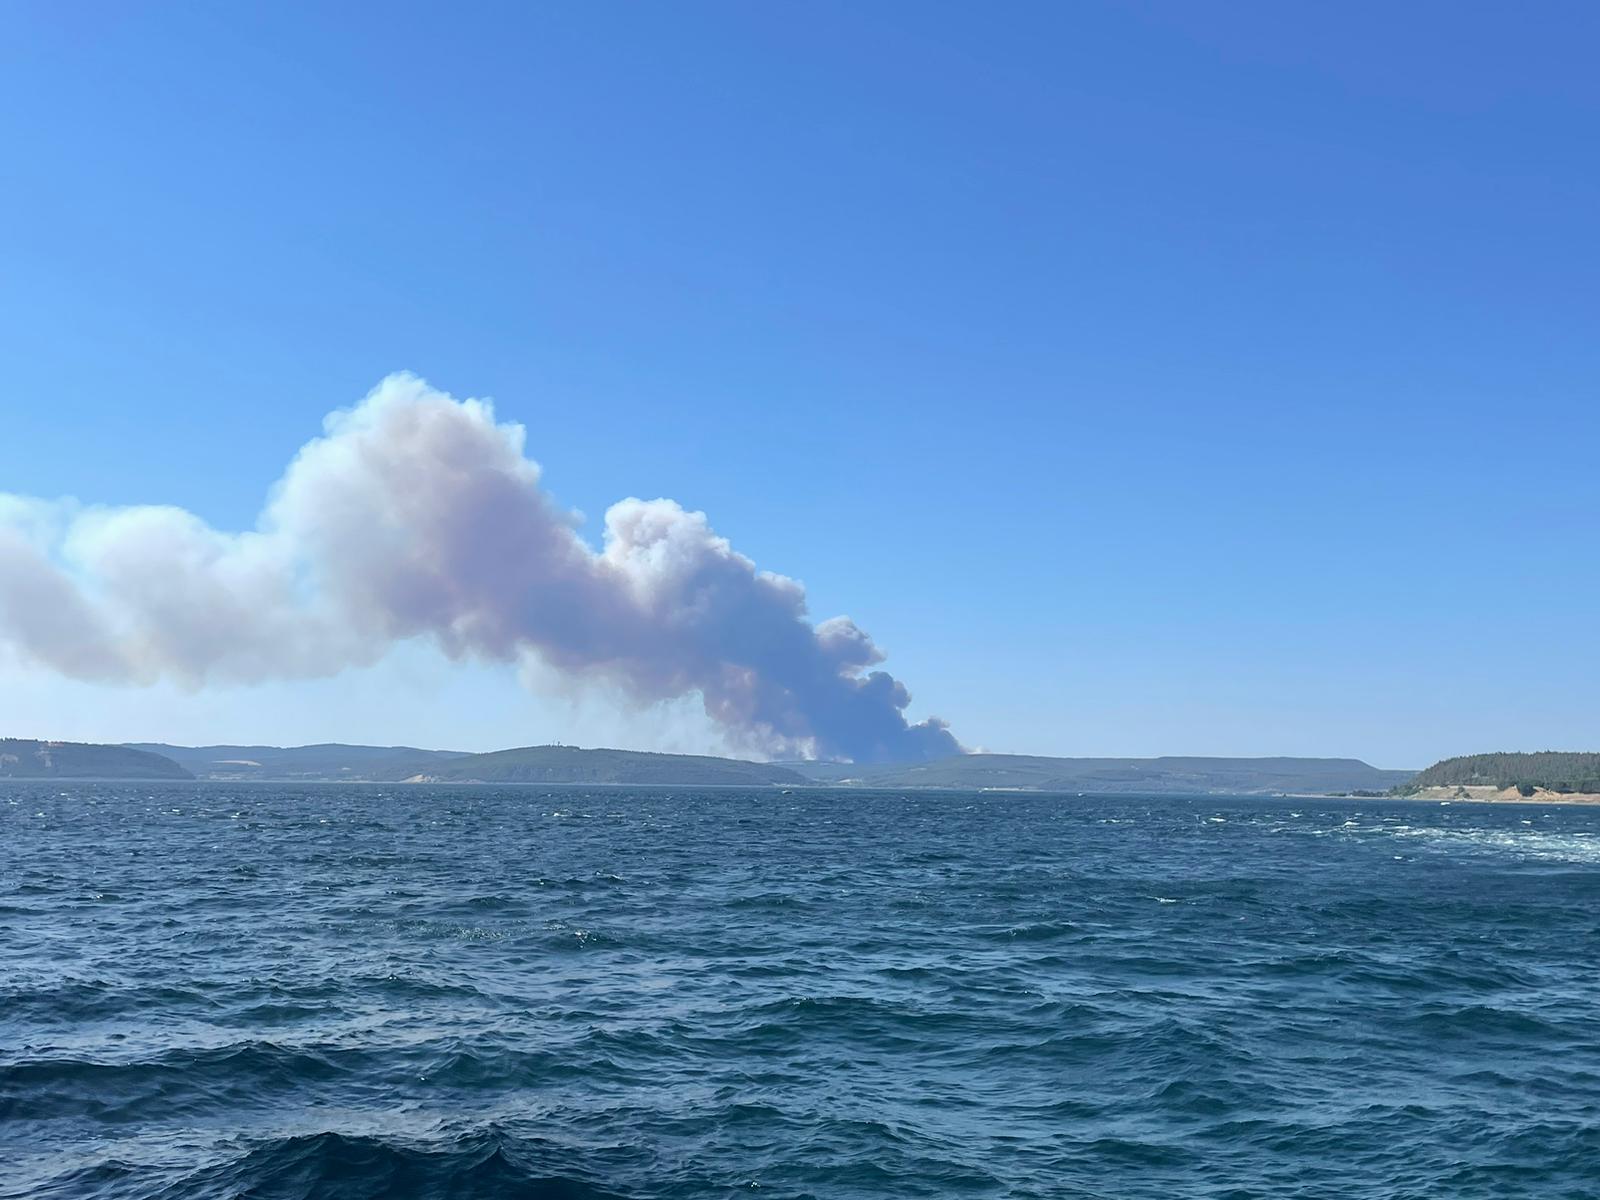 aa-20240618-34912066-34912065-oneway-ship-traffic-in-the-canakkale-strait-was-suspended-due-to-forest-fire-001.jpg